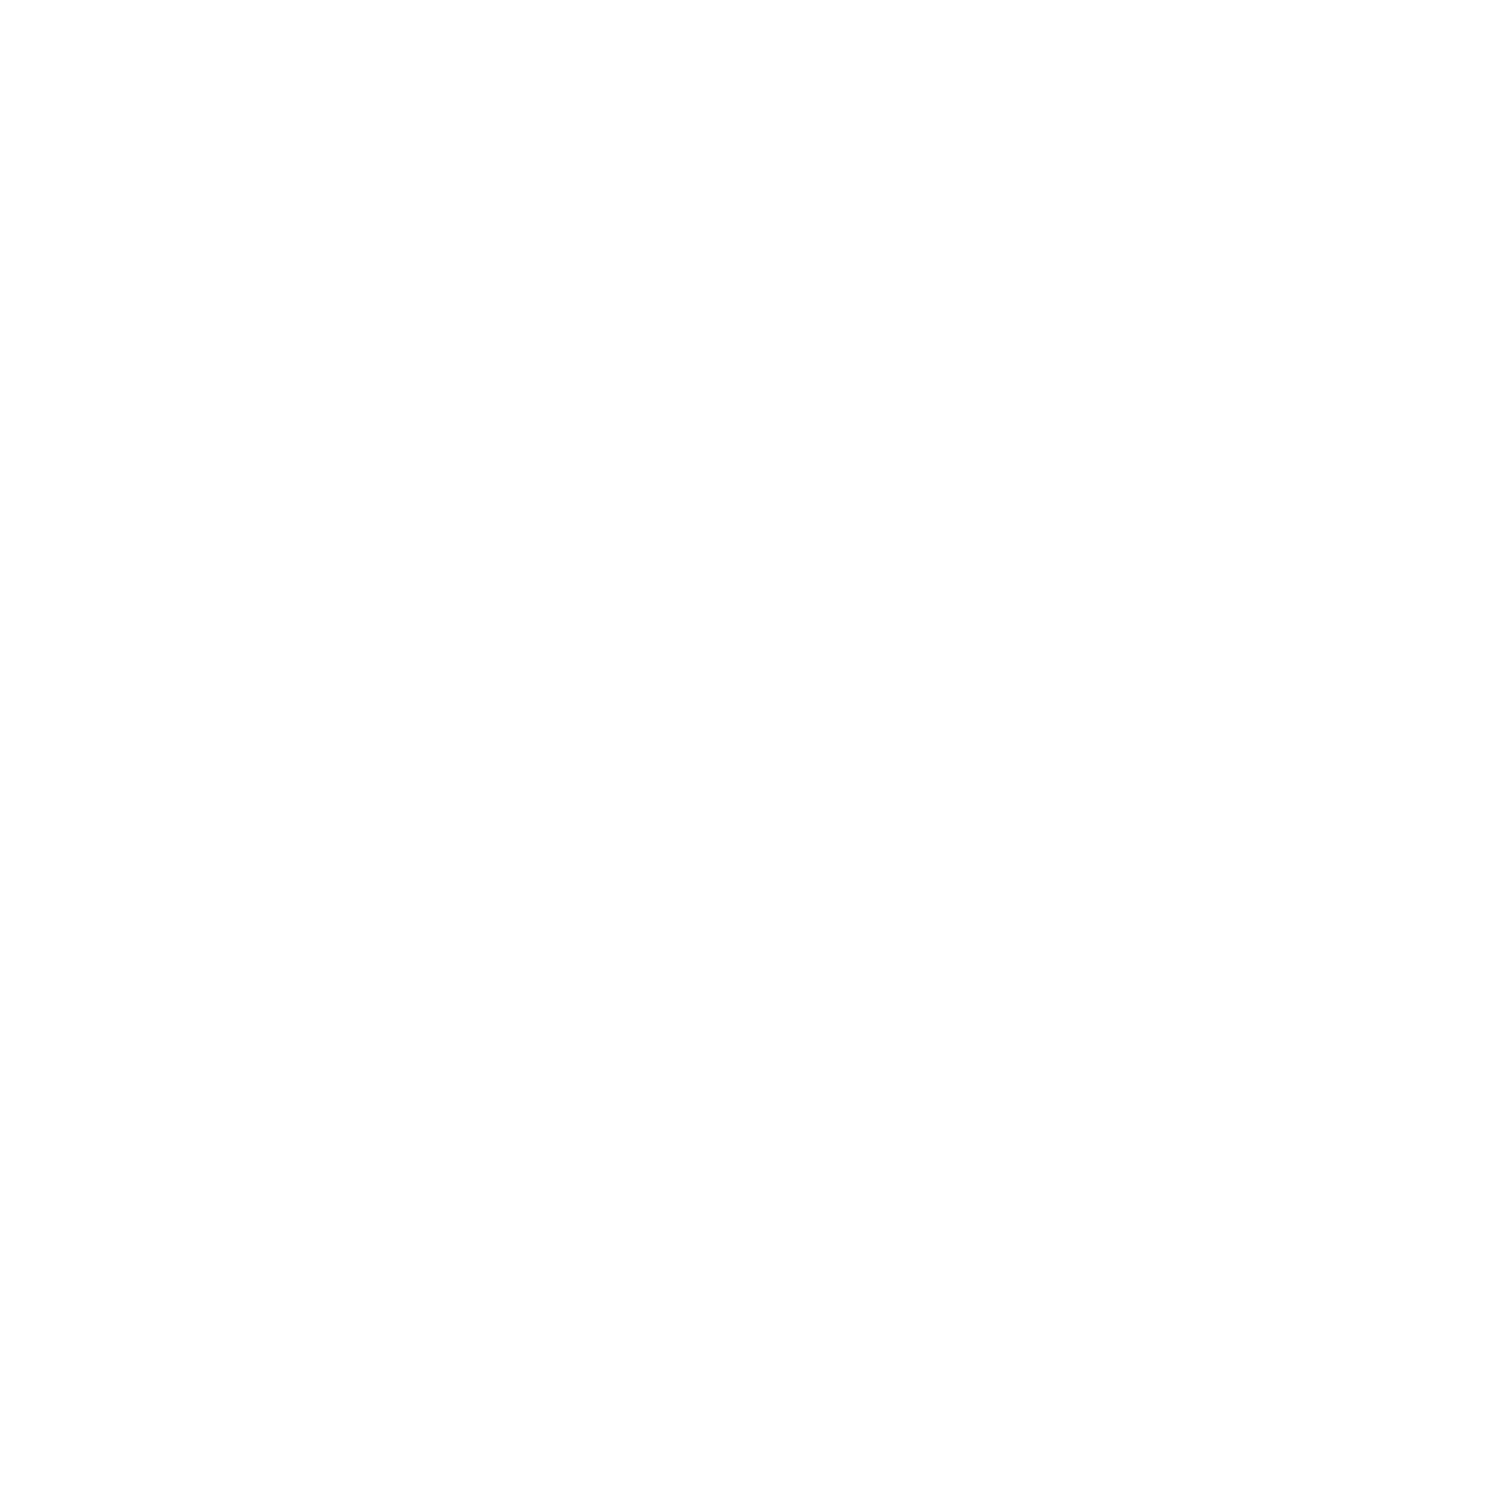 Gif of percentages changing to get to 92%